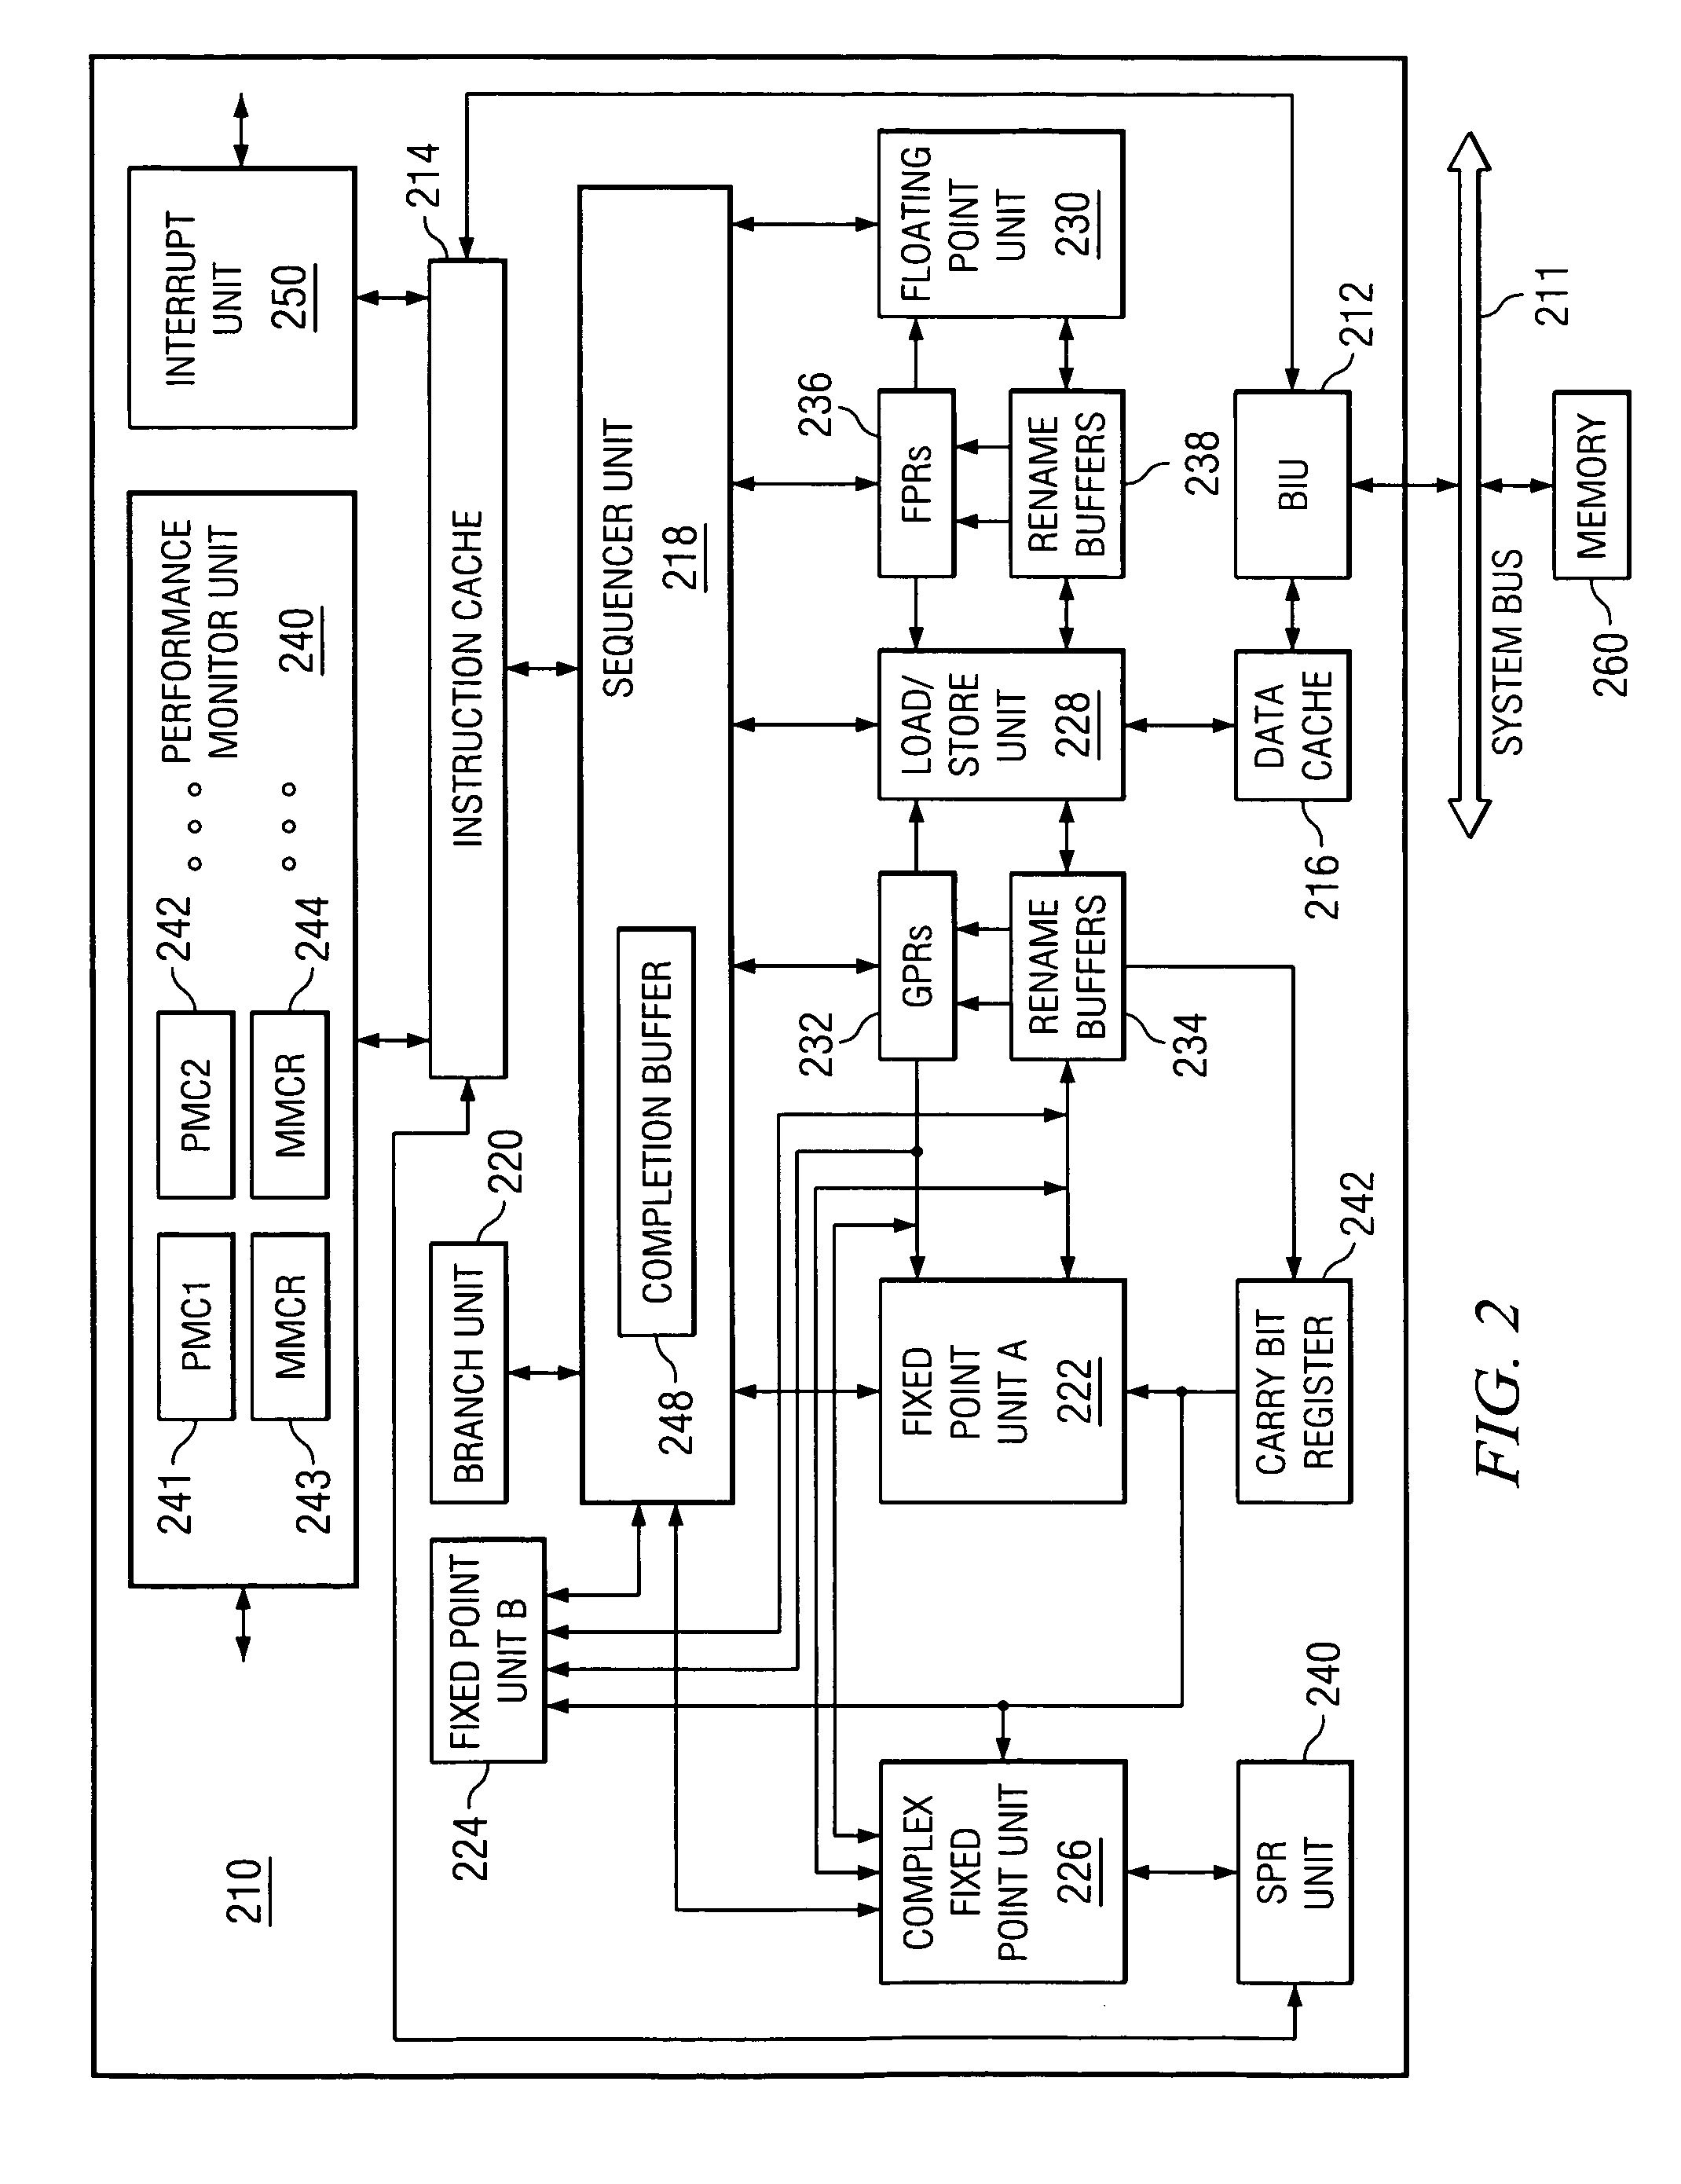 Method and apparatus for autonomic test case feedback using hardware assistance for data coverage